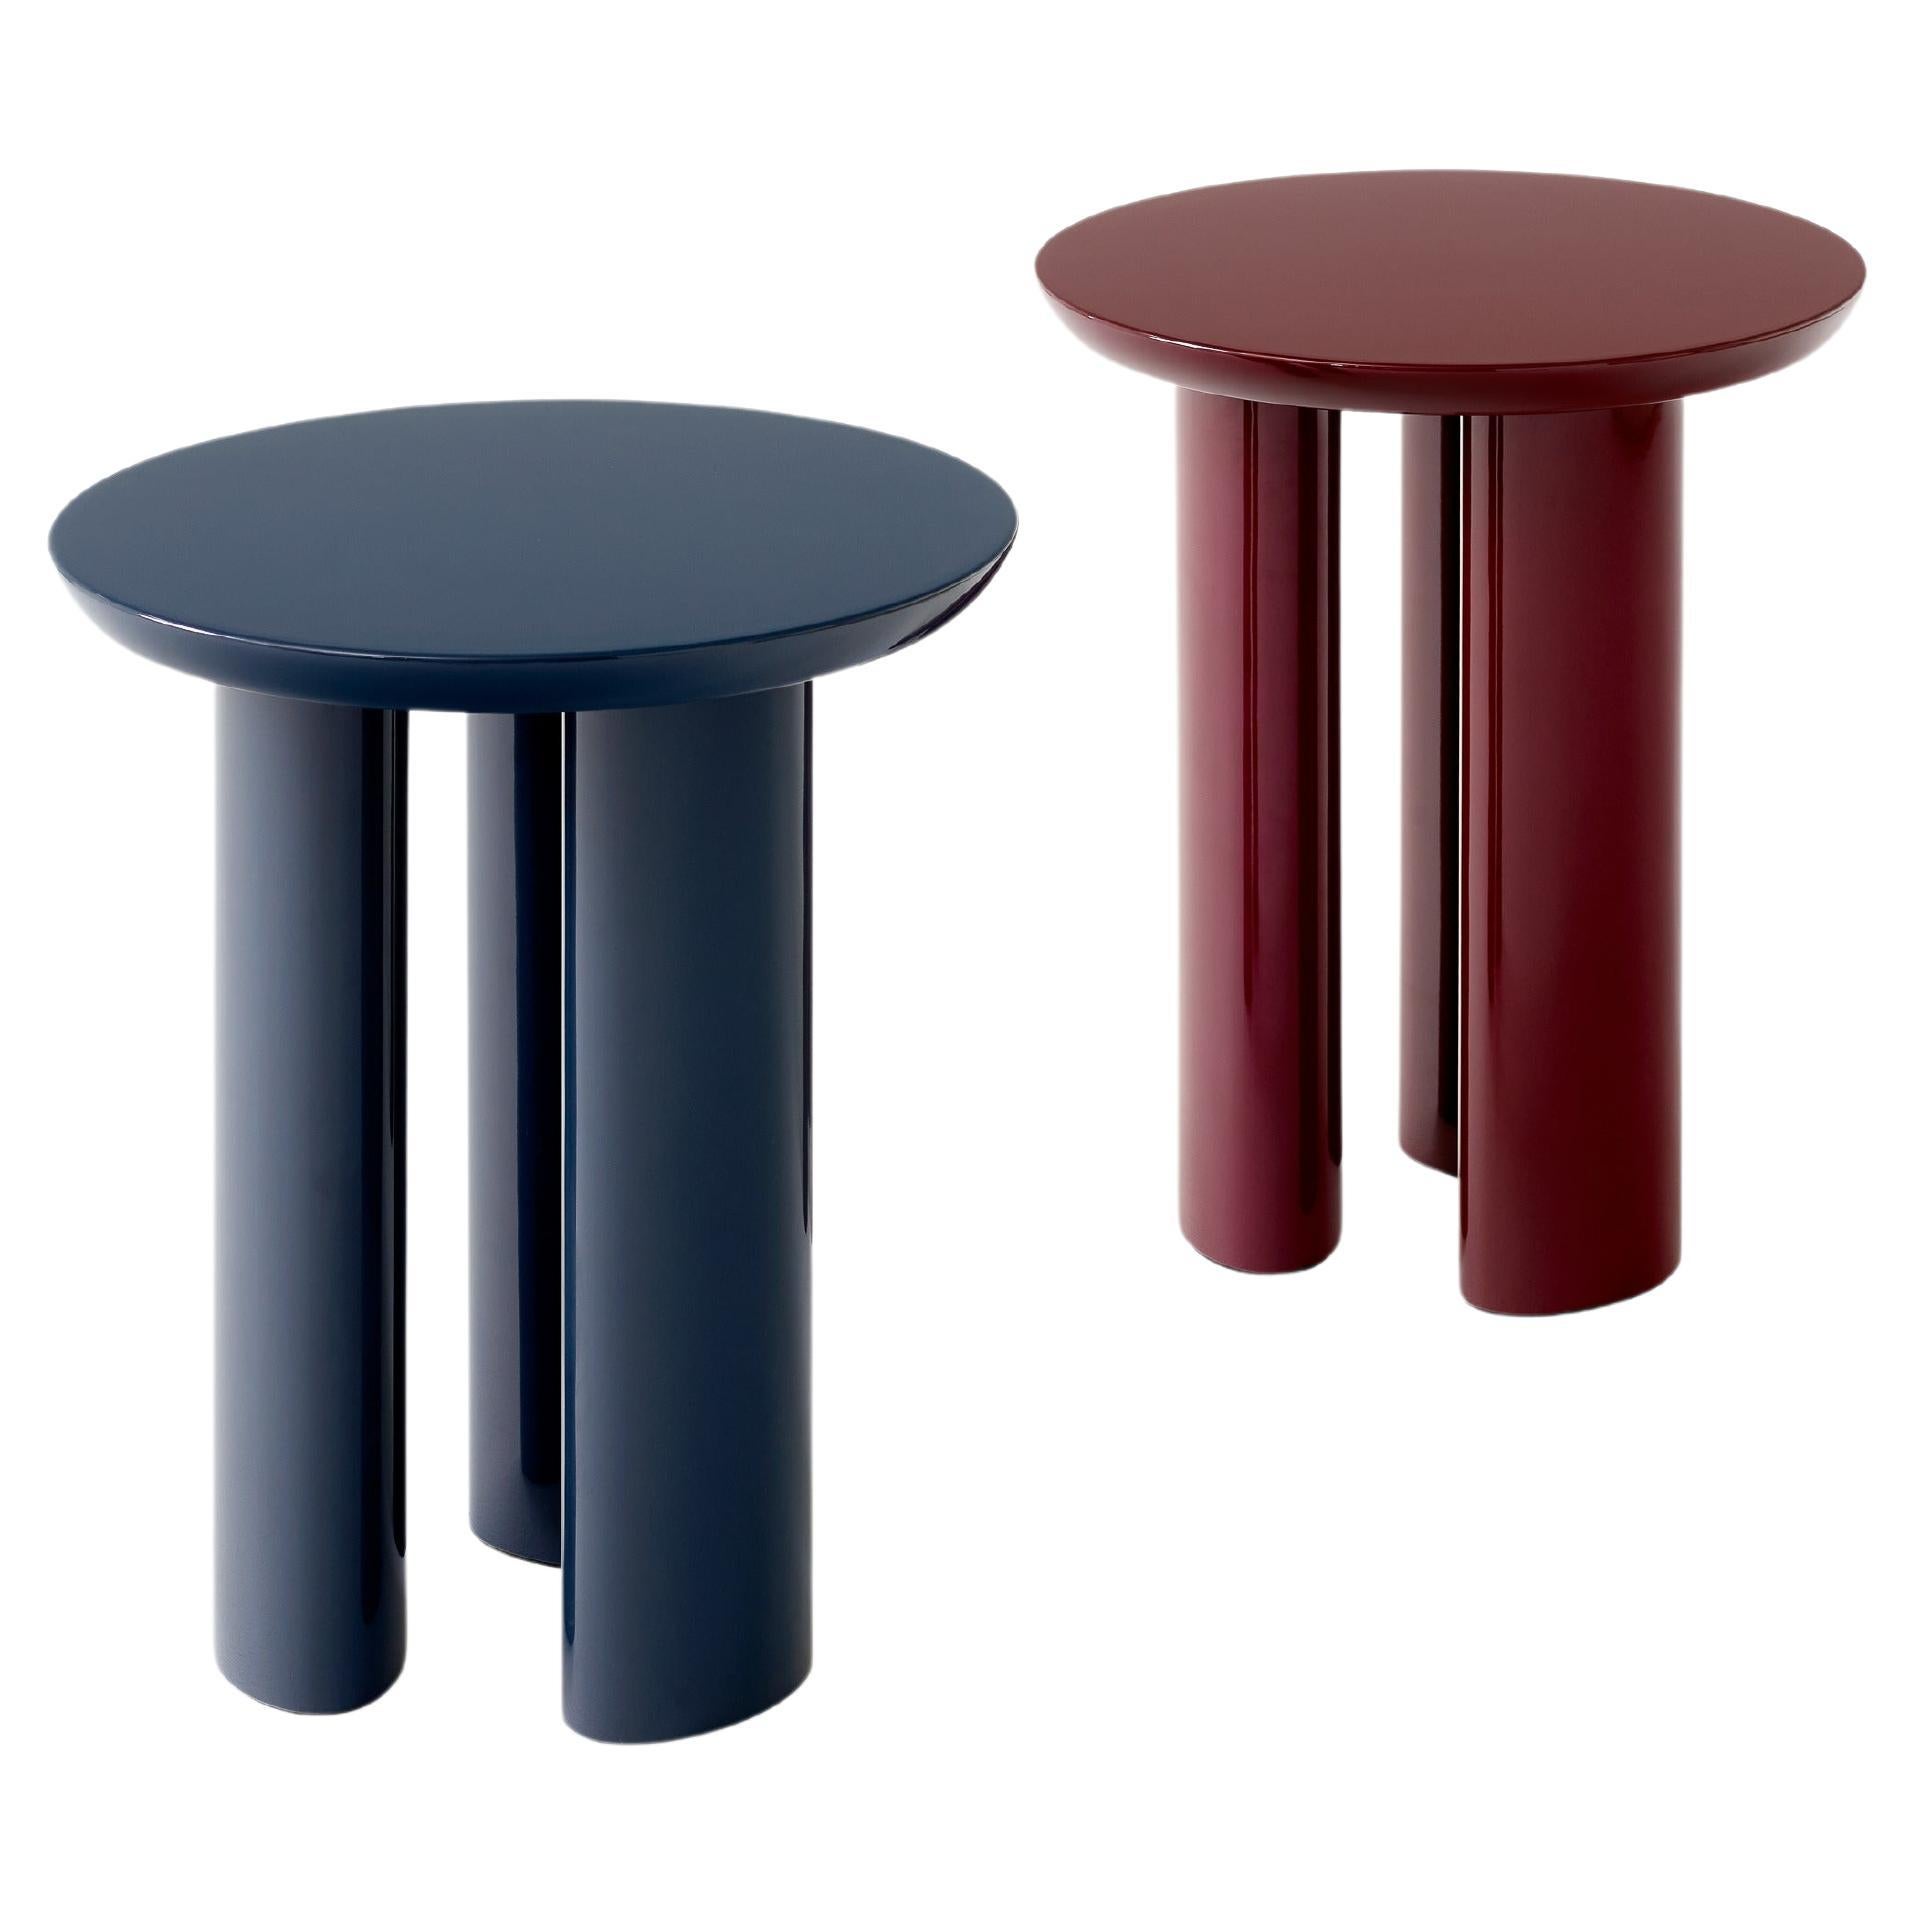 Set of Tung JA3-Burgundy Red & Steel Blue-Side Table, by John Astbury for &T For Sale